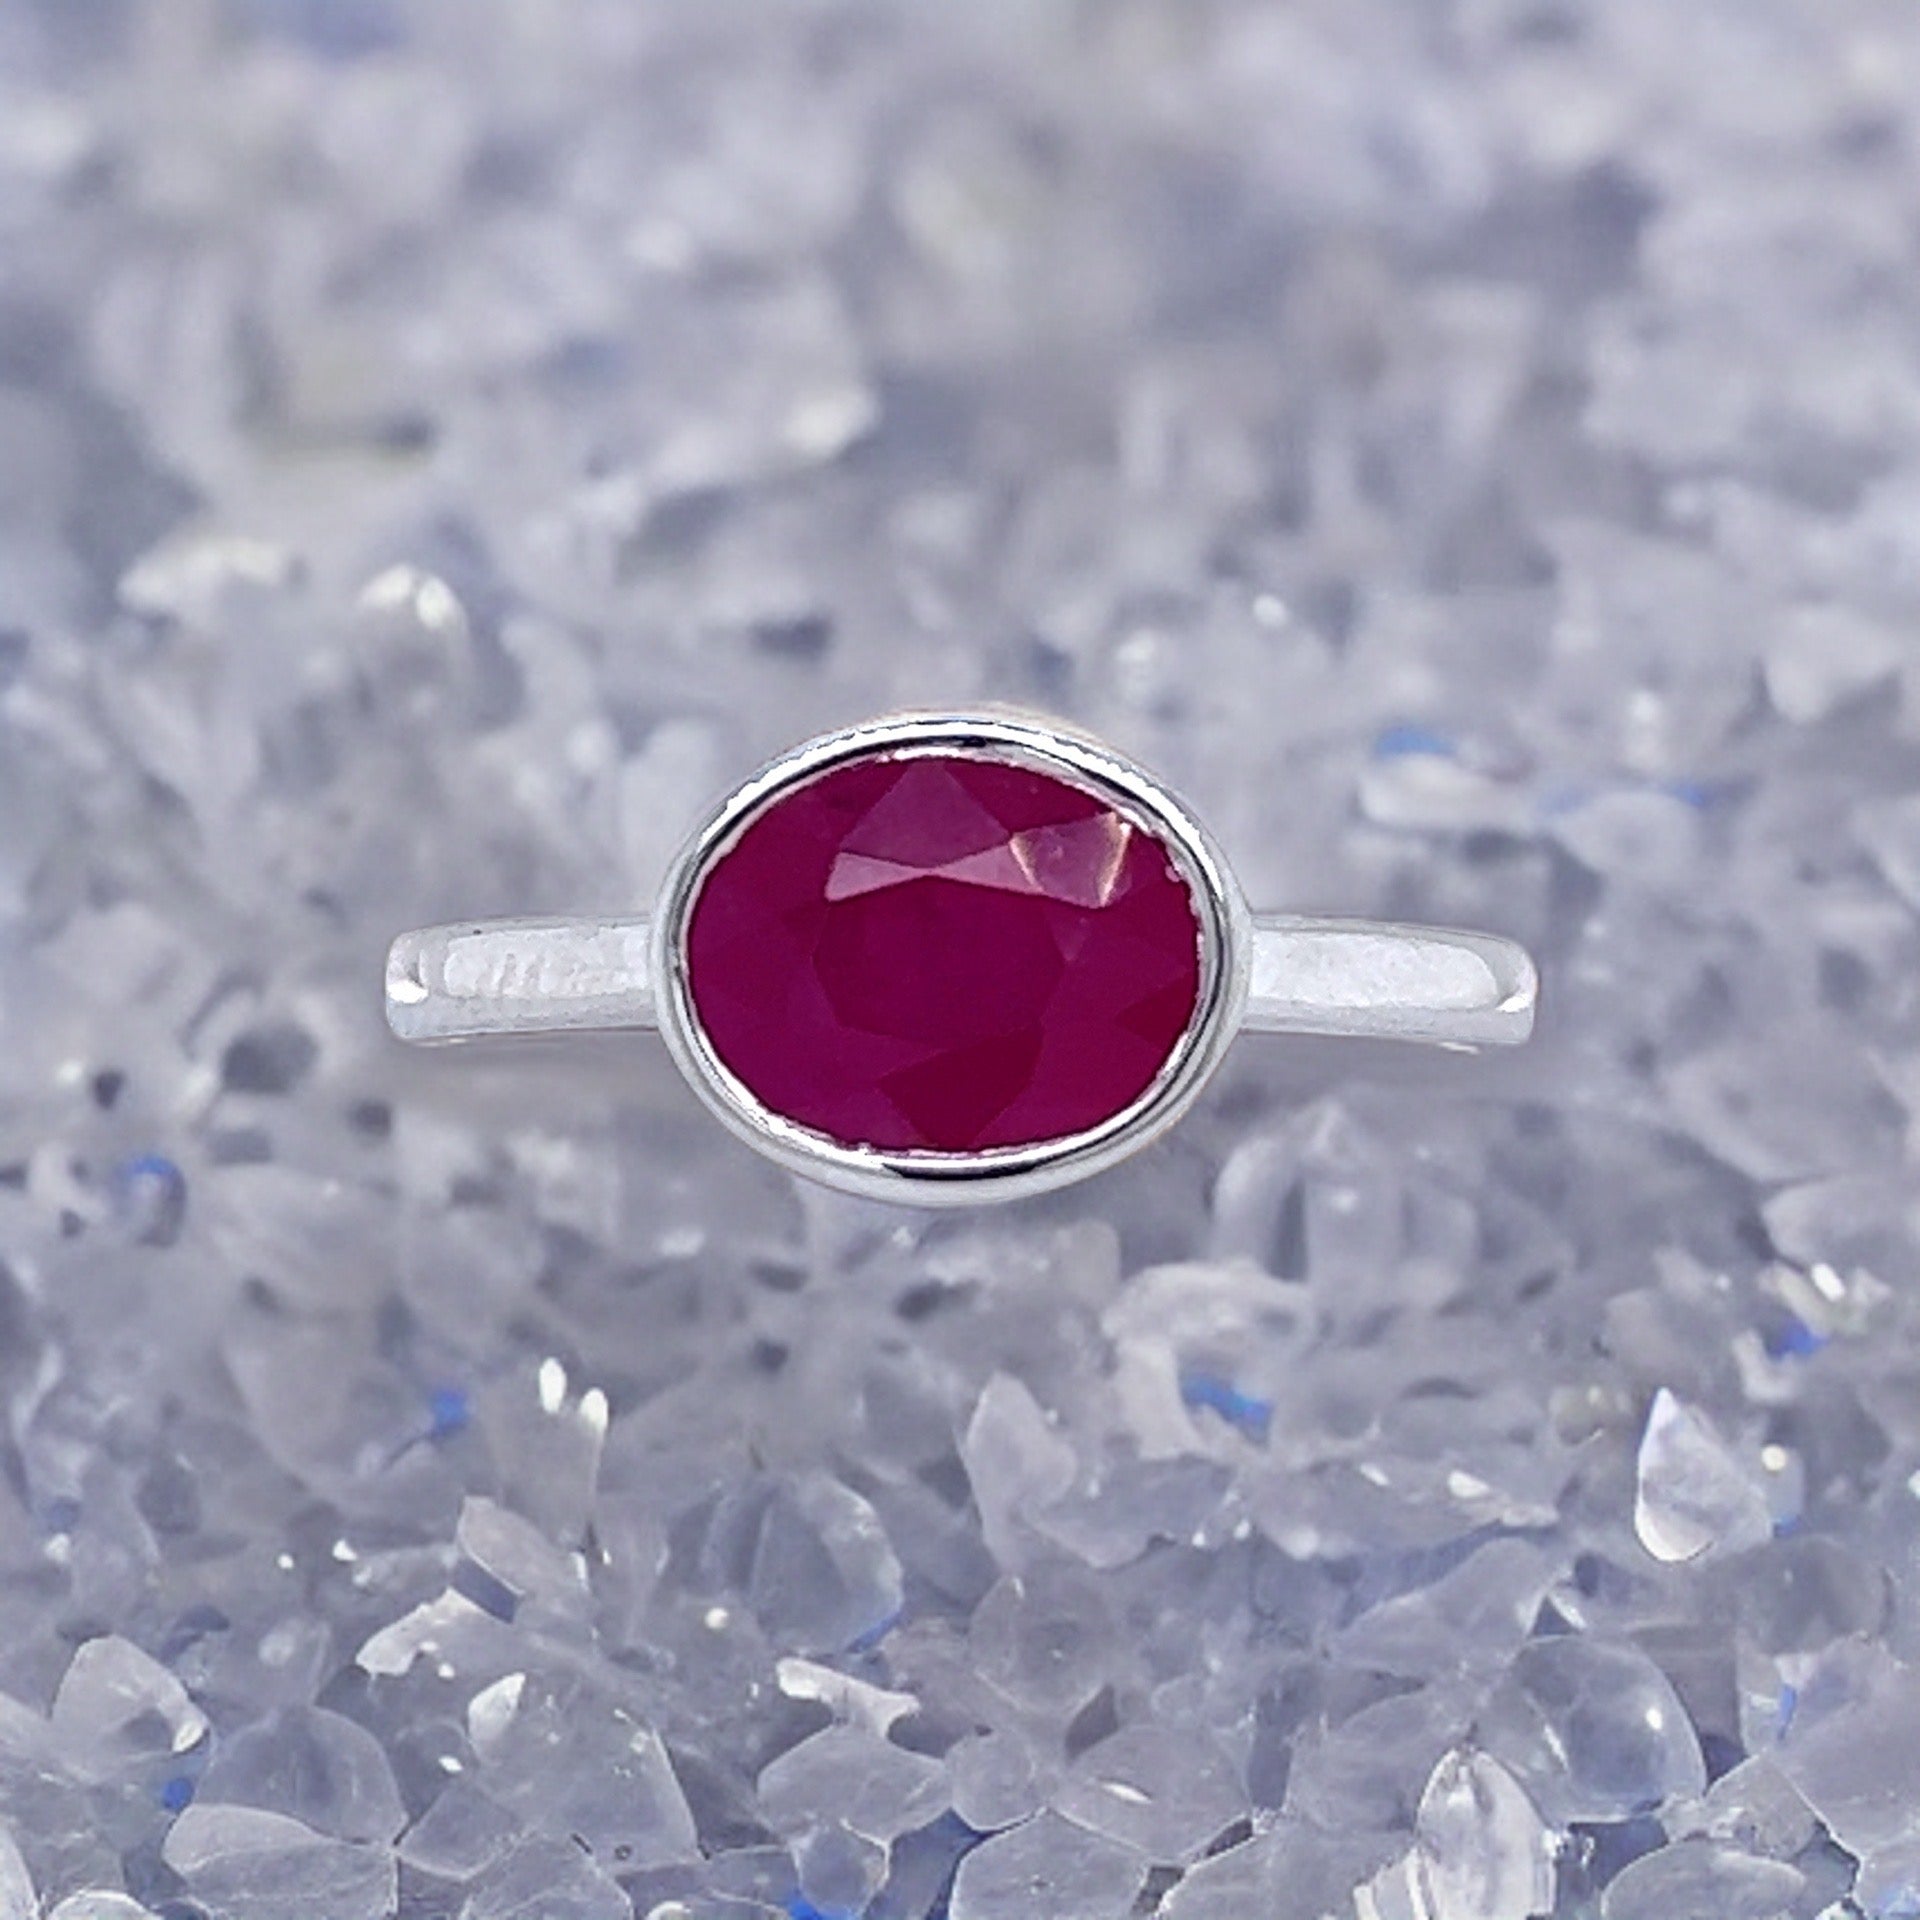 Natural Ruby Ring 6.5 14k White Gold 2.38 TCW Certified $2,190 221354 - Certified Fine Jewelry